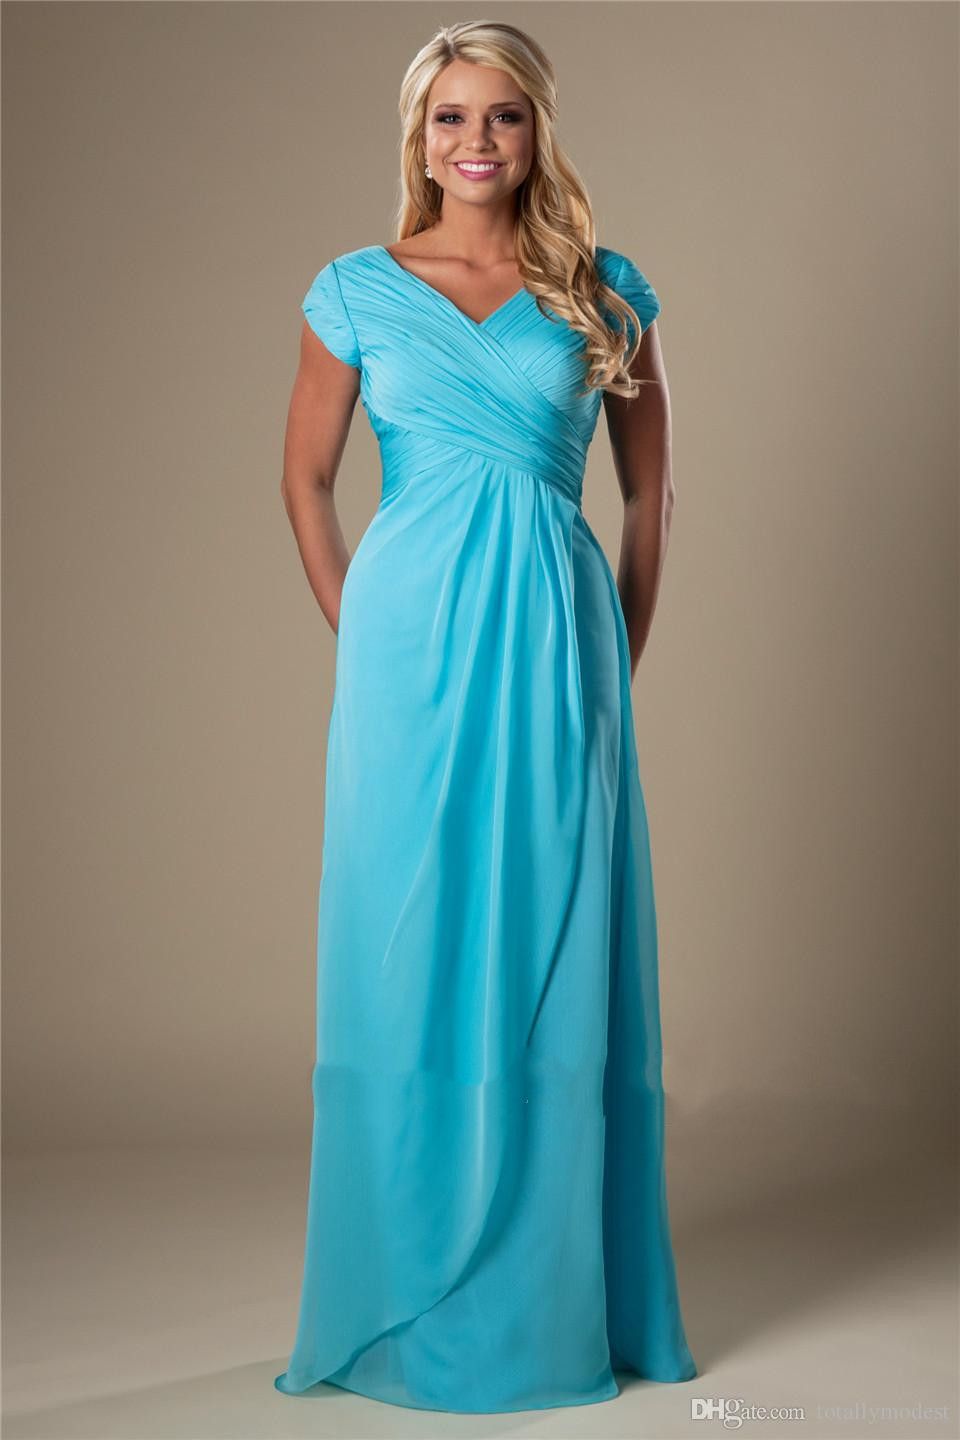 Blue Chiffon Modest Bridesmaid Dresses With Cap Sleeves Long Floor ...